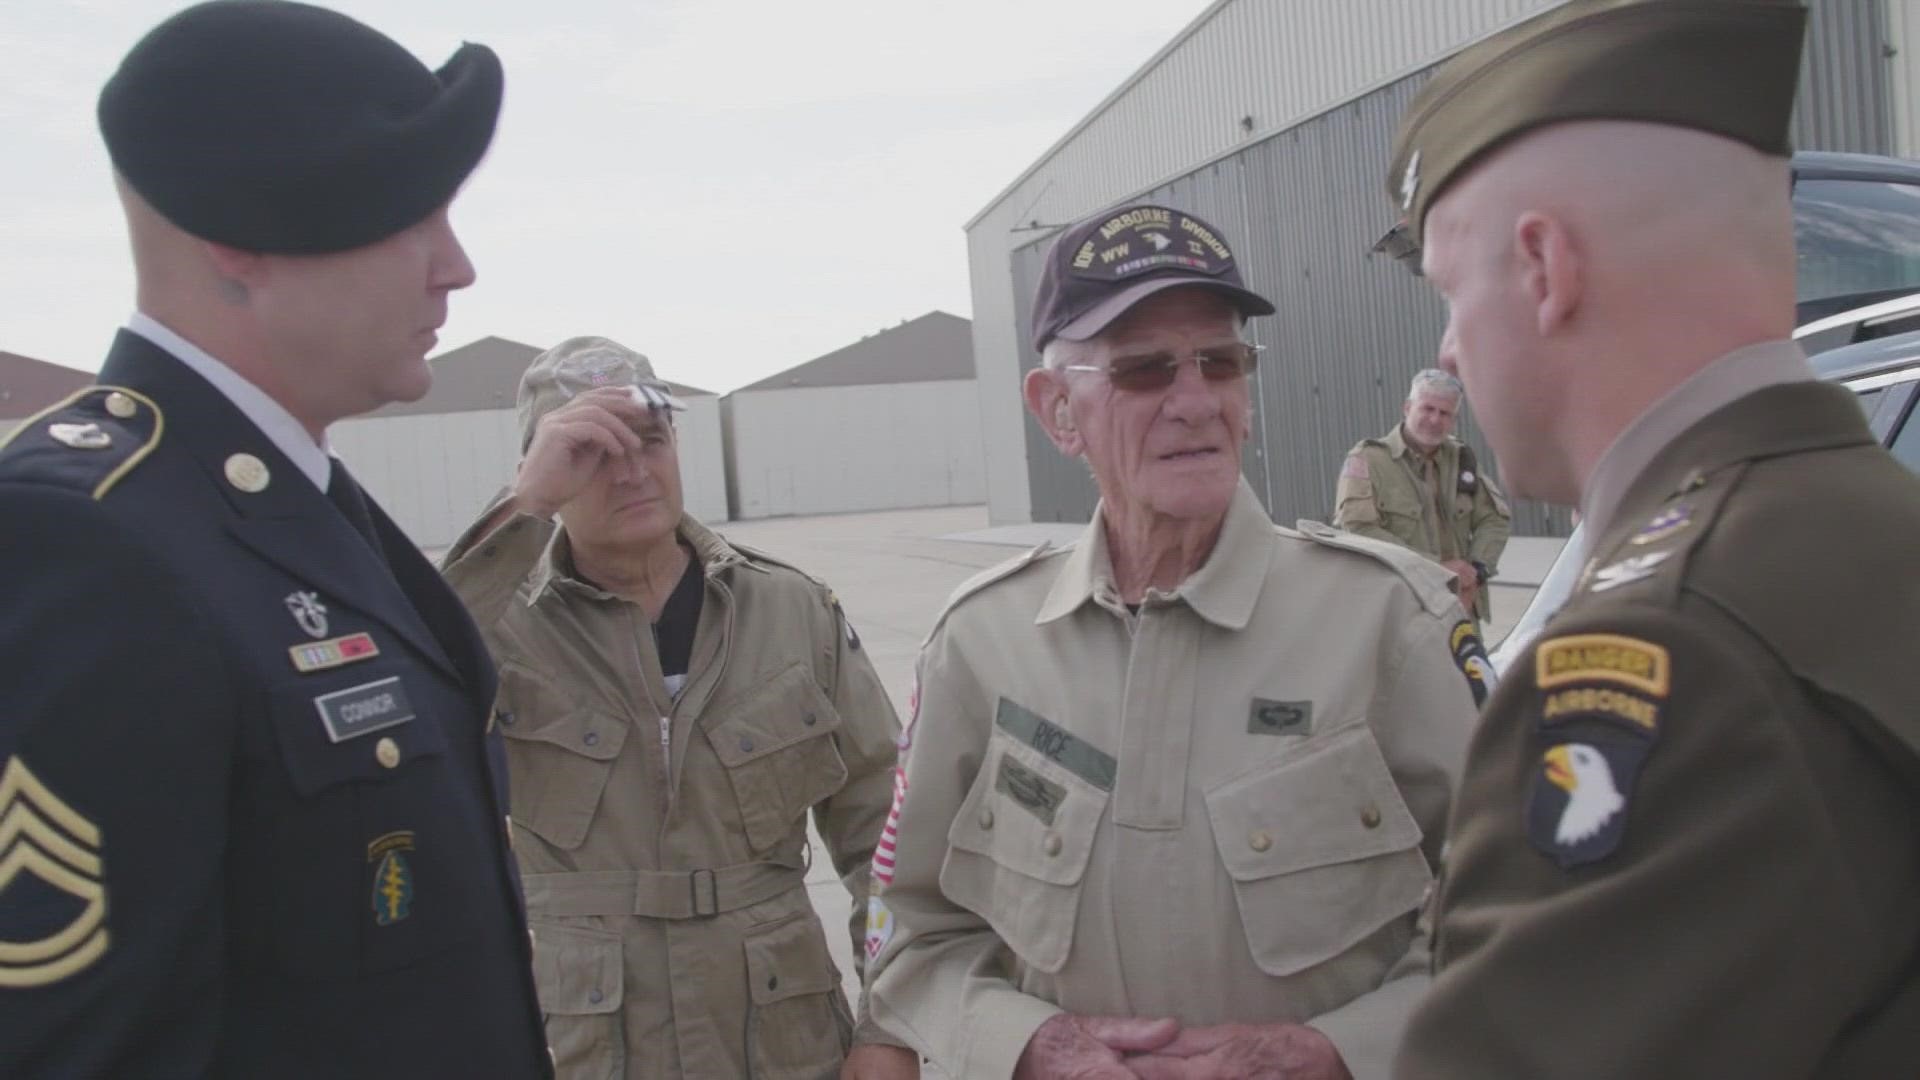 A World War II veteran and former paratrooper jumped from a plane.